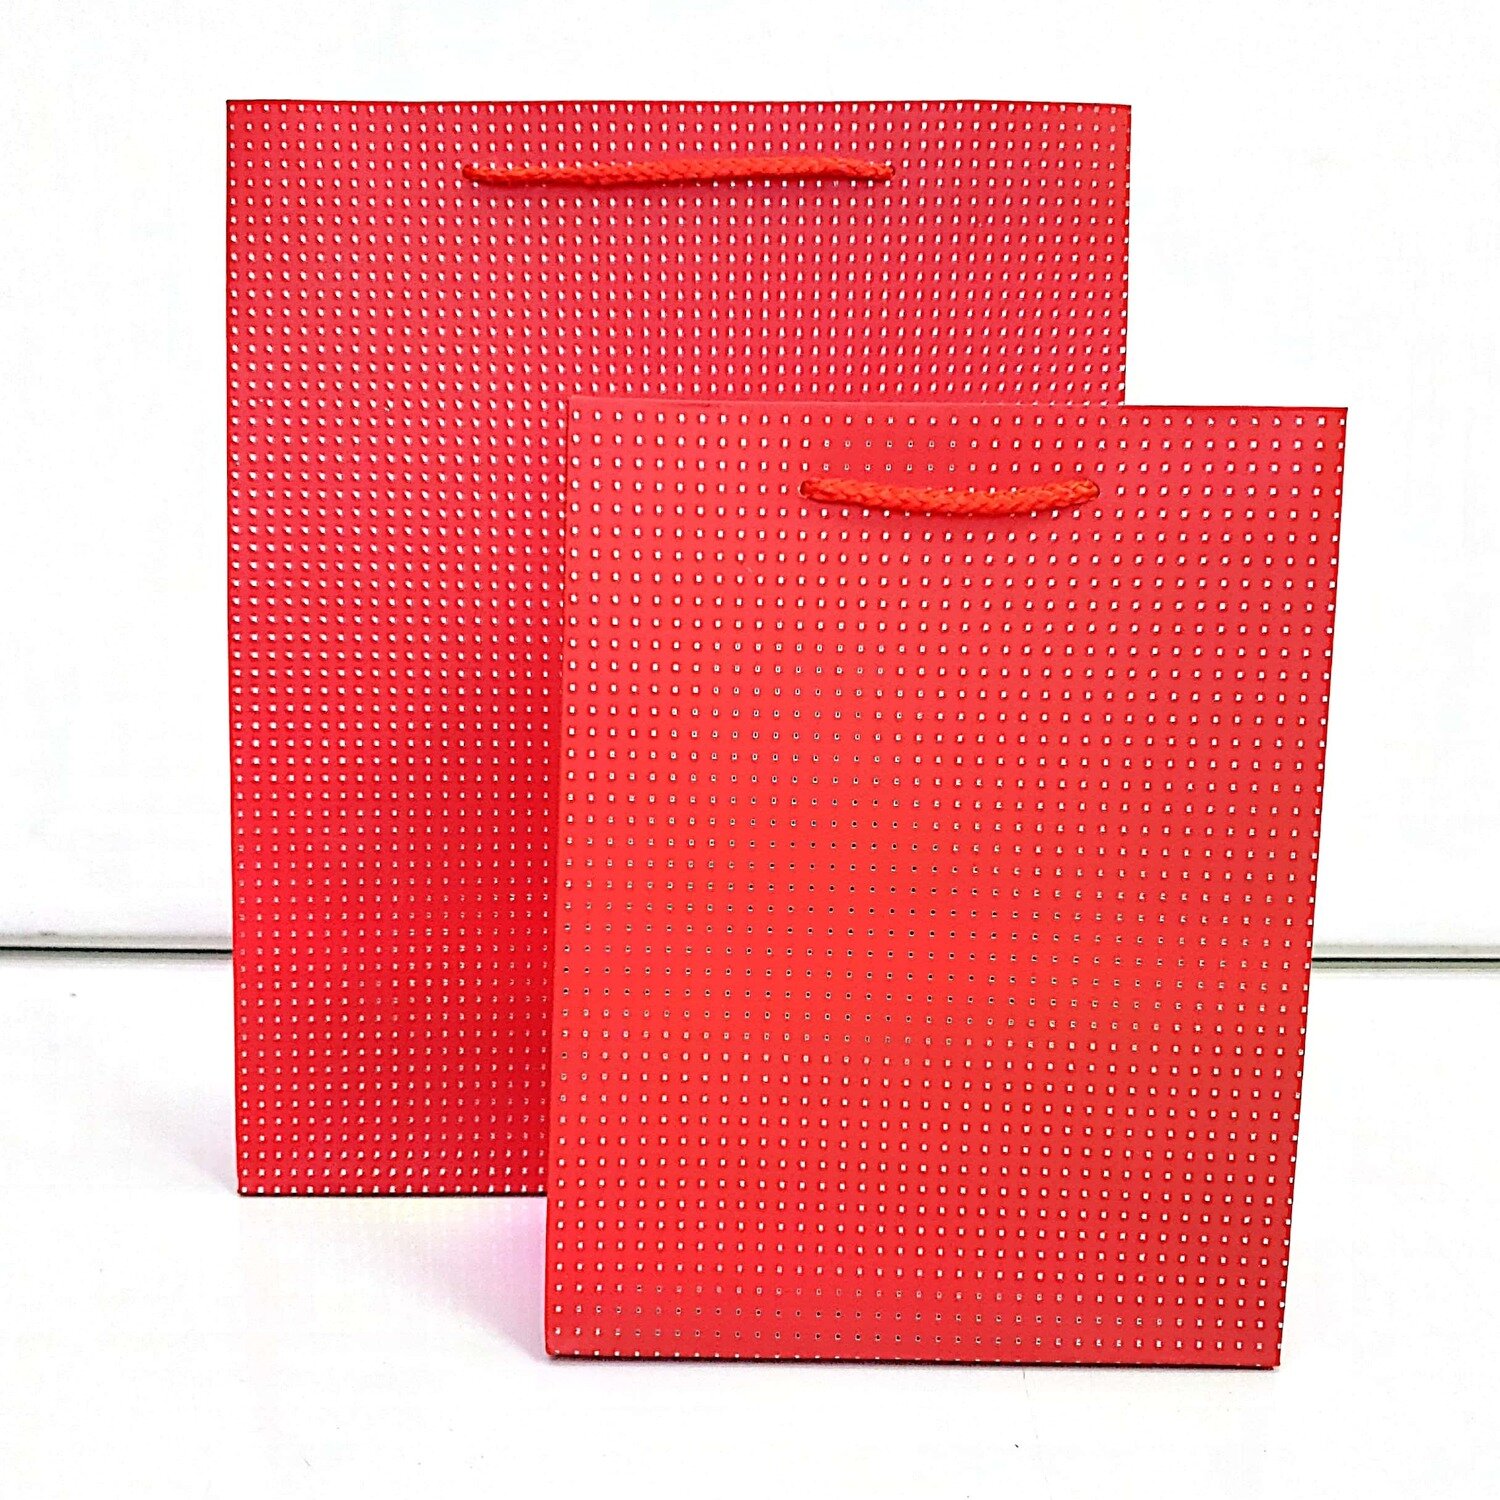 Red with Small Dots Medium Gift Bag PK3 (R15.50 Each)